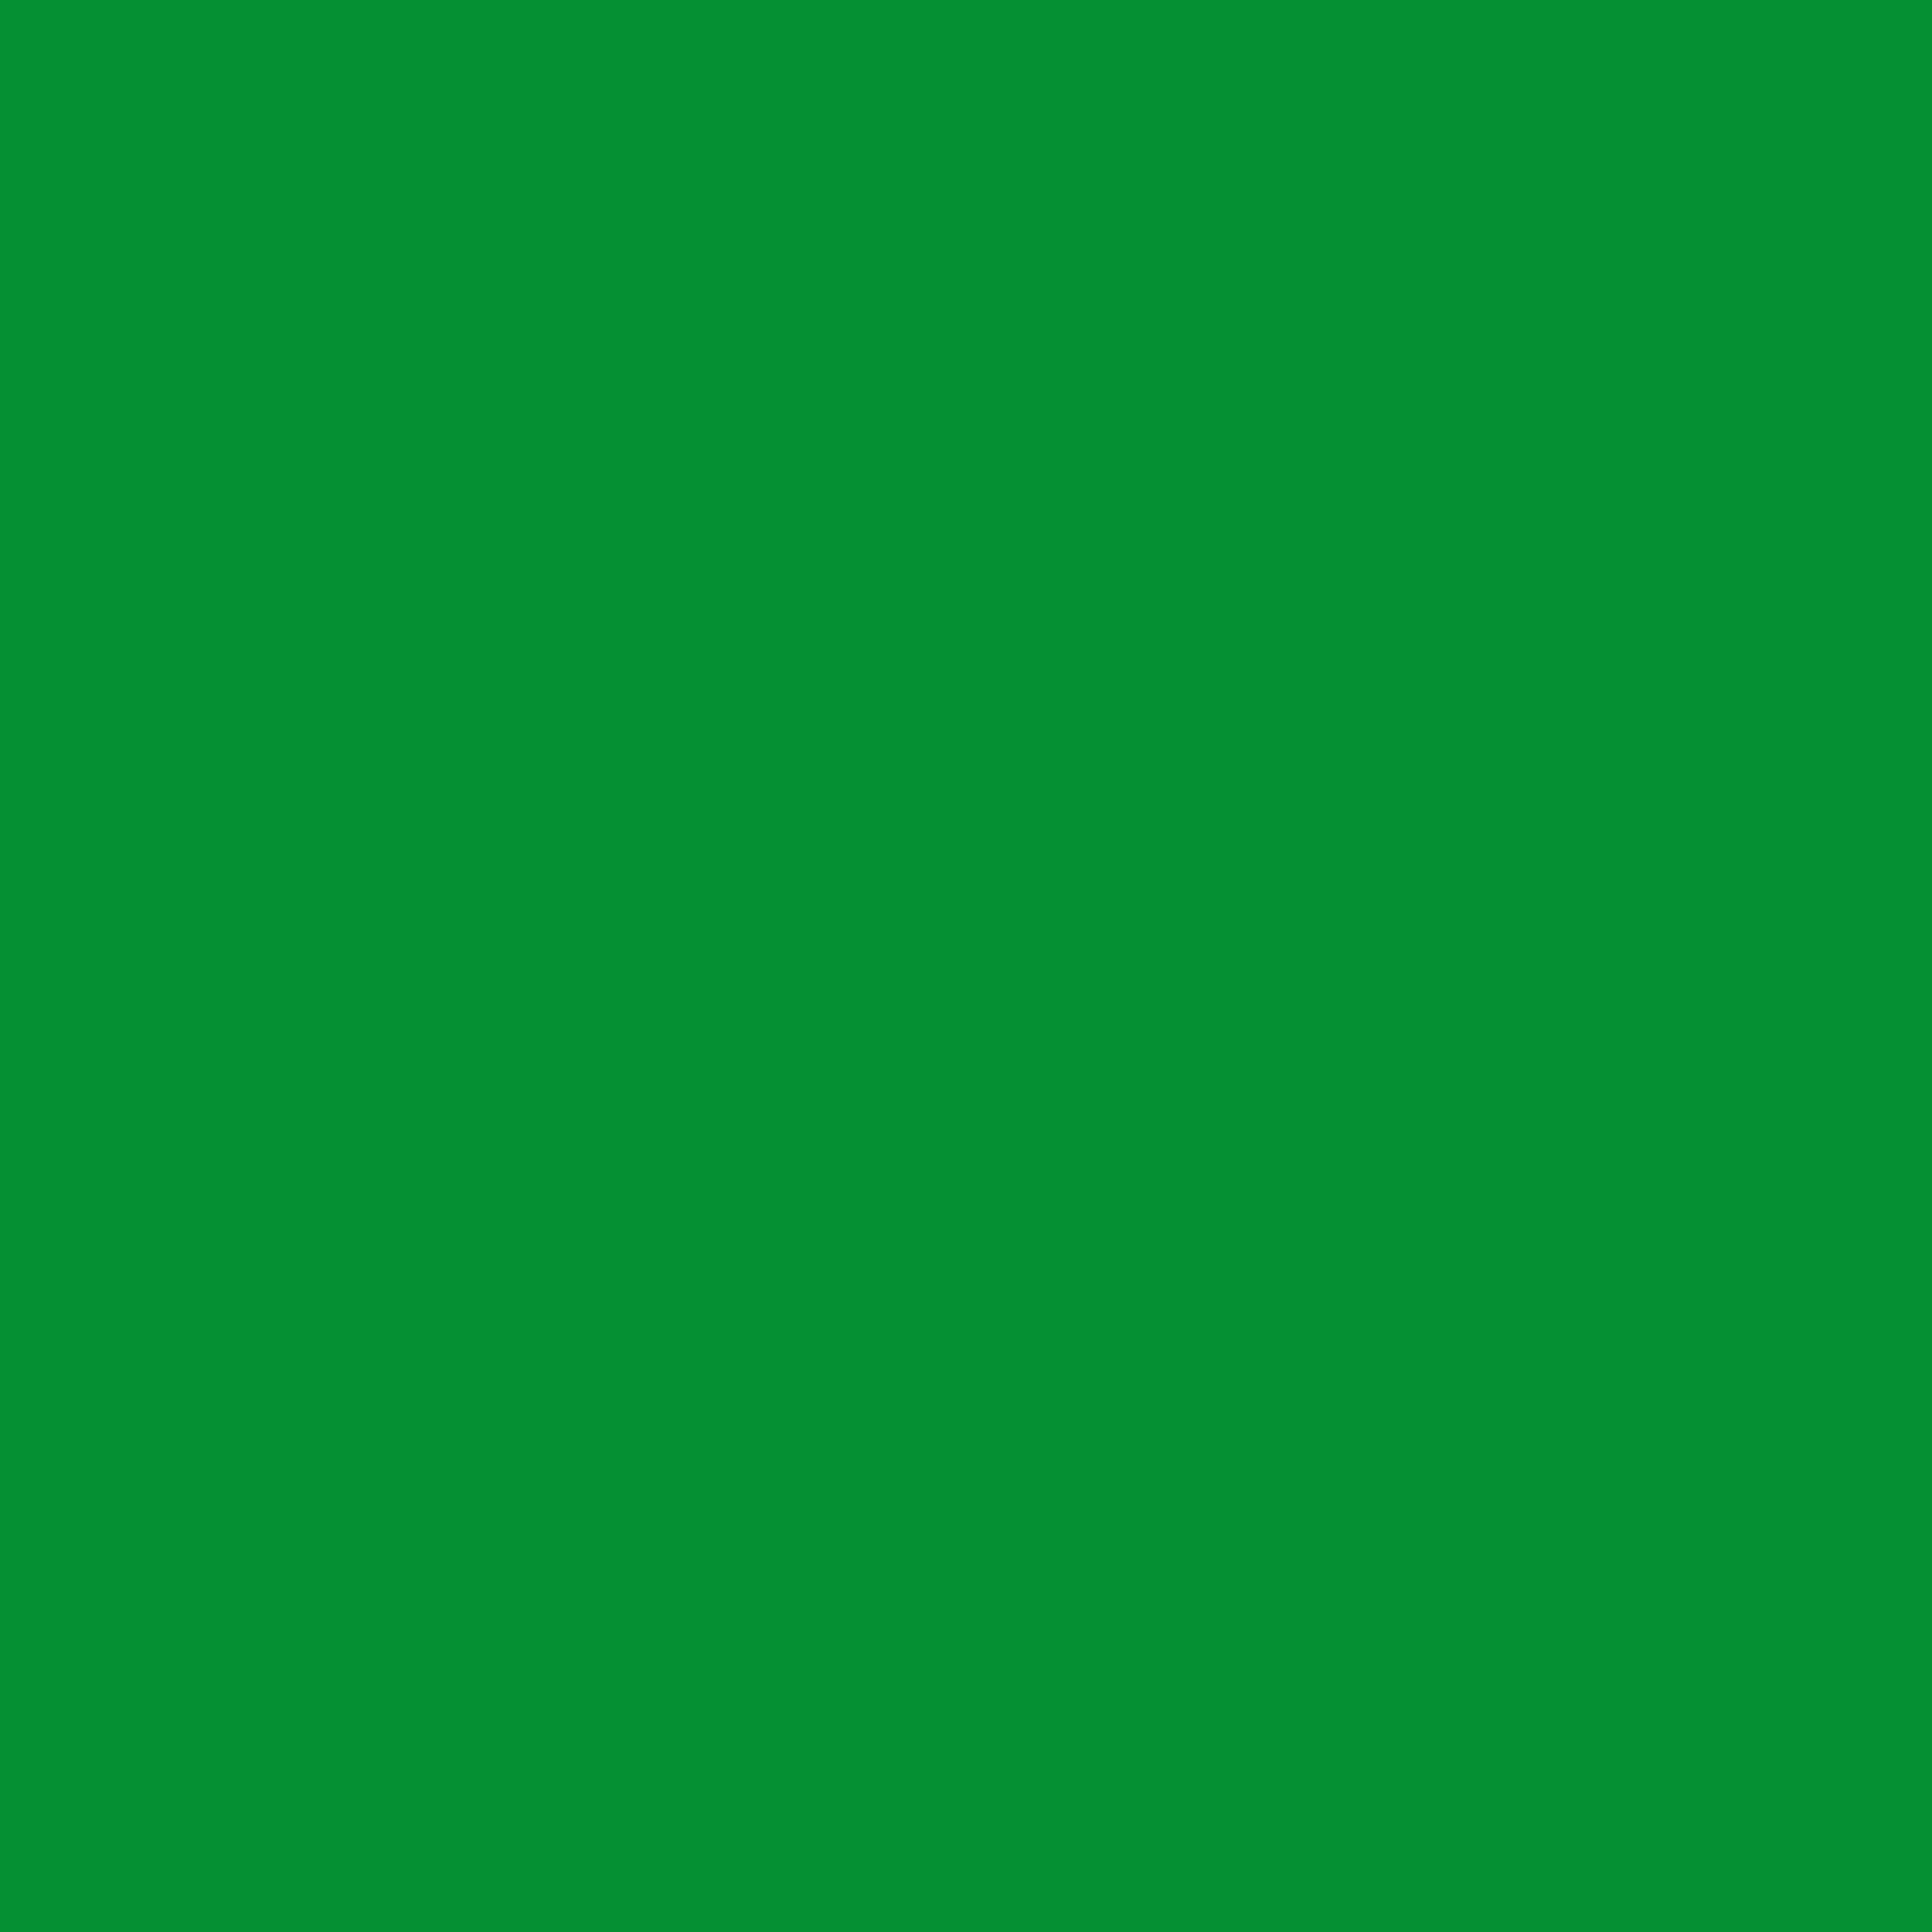 2732x2732 North Texas Green Solid Color Background